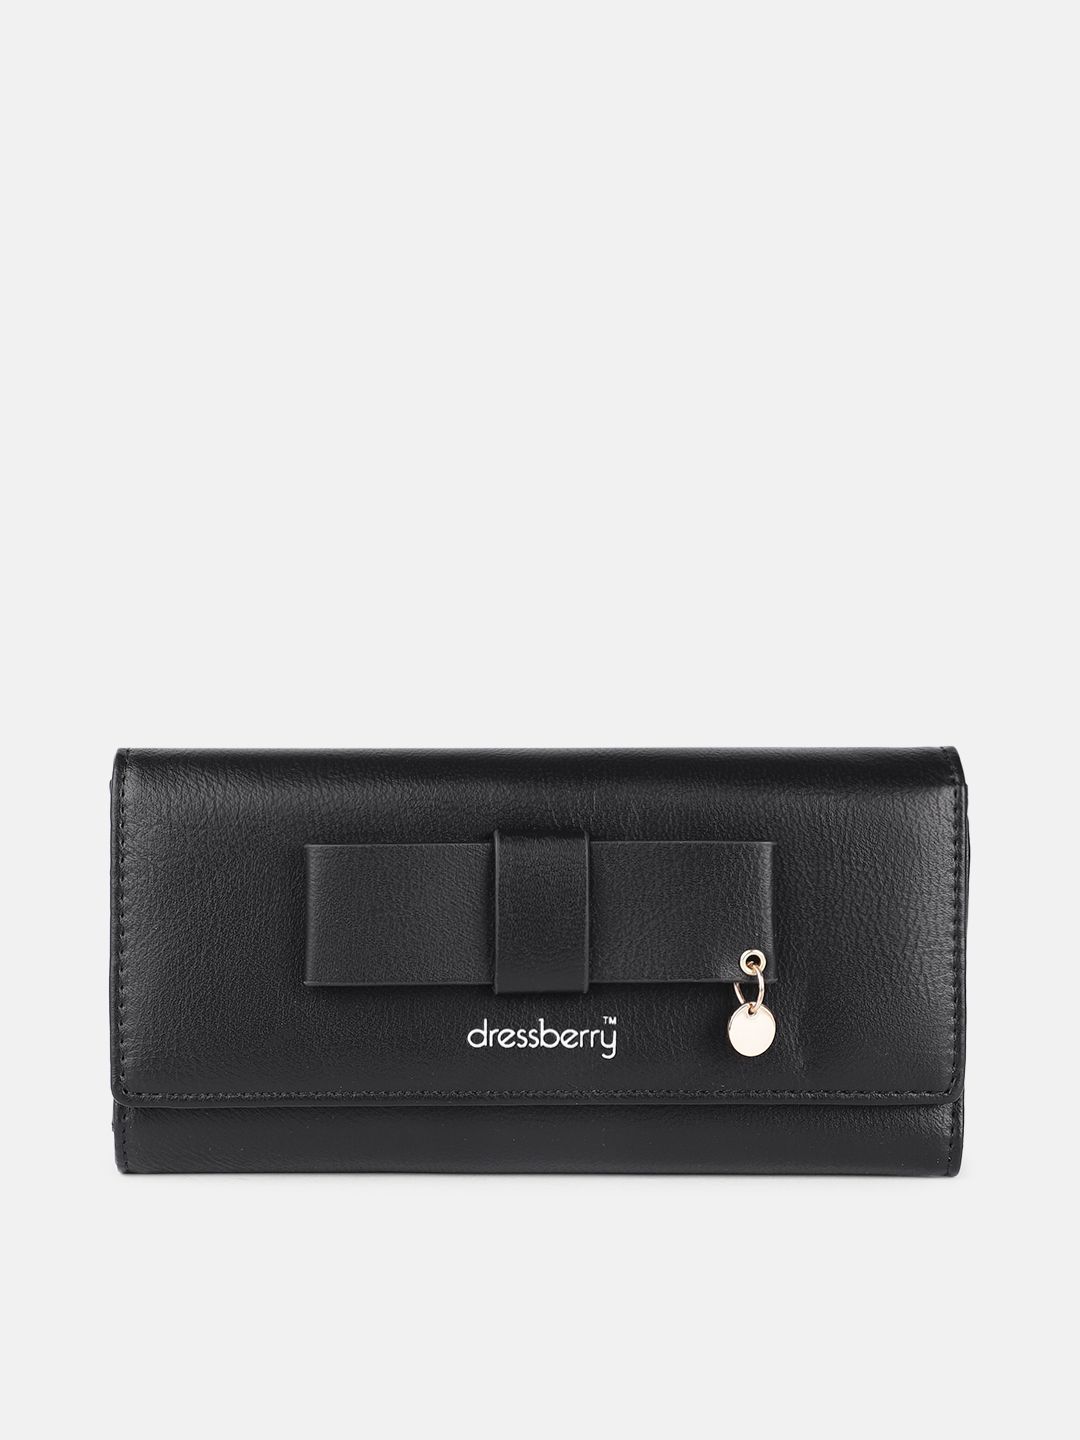 DressBerry Women Black PU Three Fold Wallet with Bow Price in India